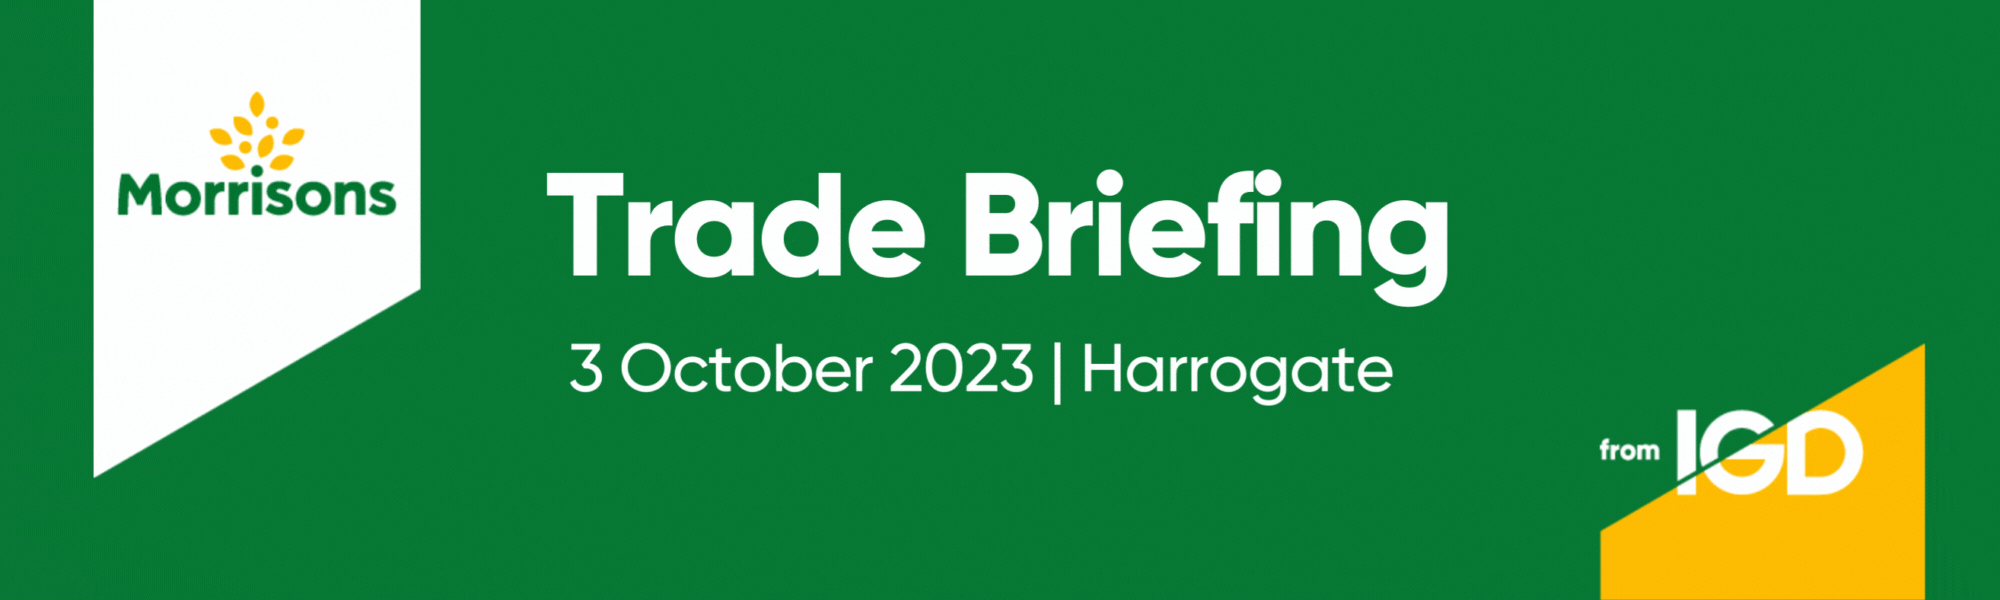 Join the Morrisons leadership team at the Harrogate Convention Centre on 3 October 2023 for our inaugural Trade Briefing brought to you by IGD.